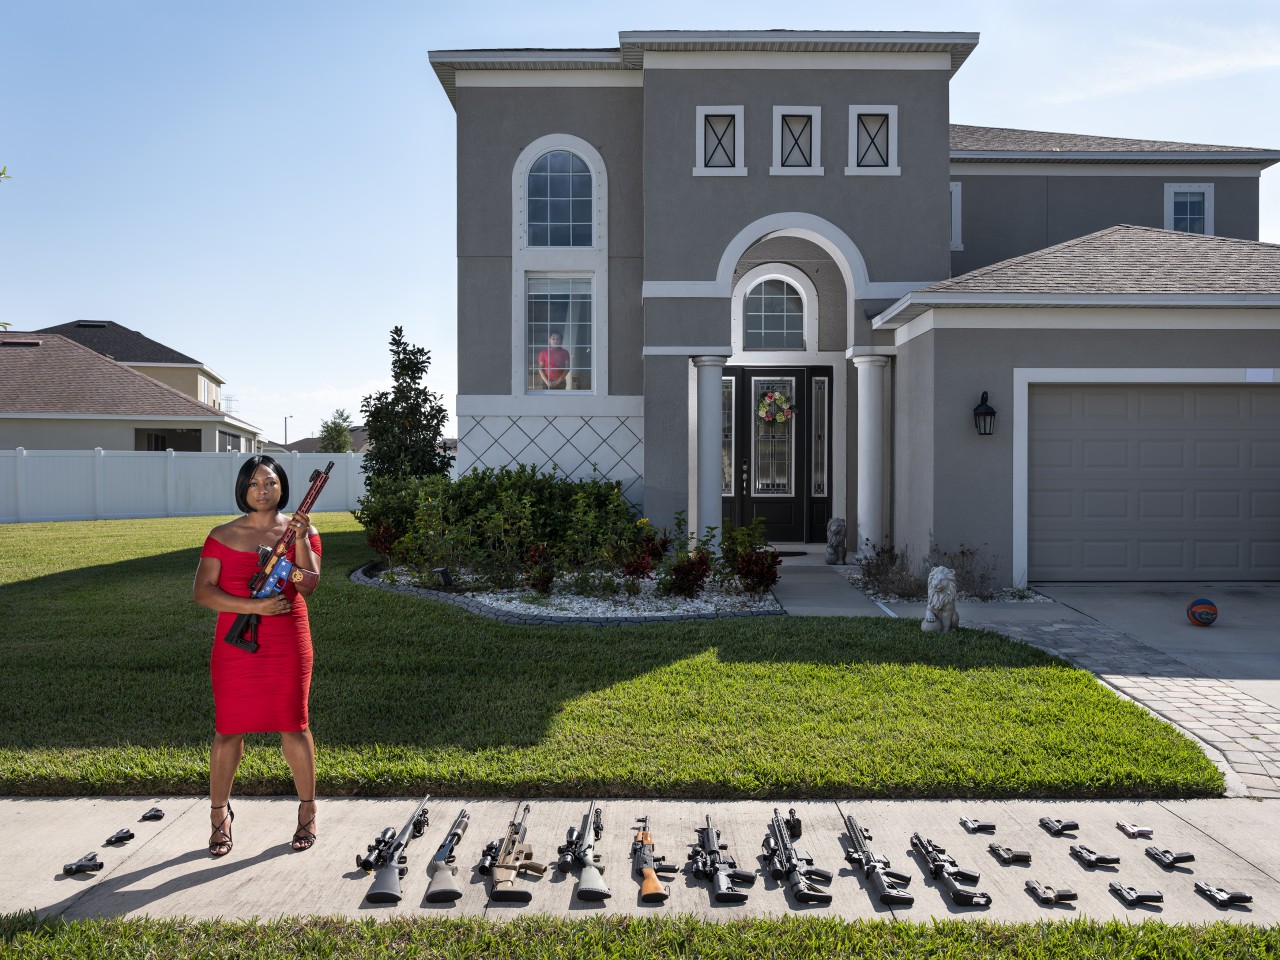 2nd Place - Avery Skipalis (33), outside of her house, posing together with all the firearms she owns, Tampa, Florida